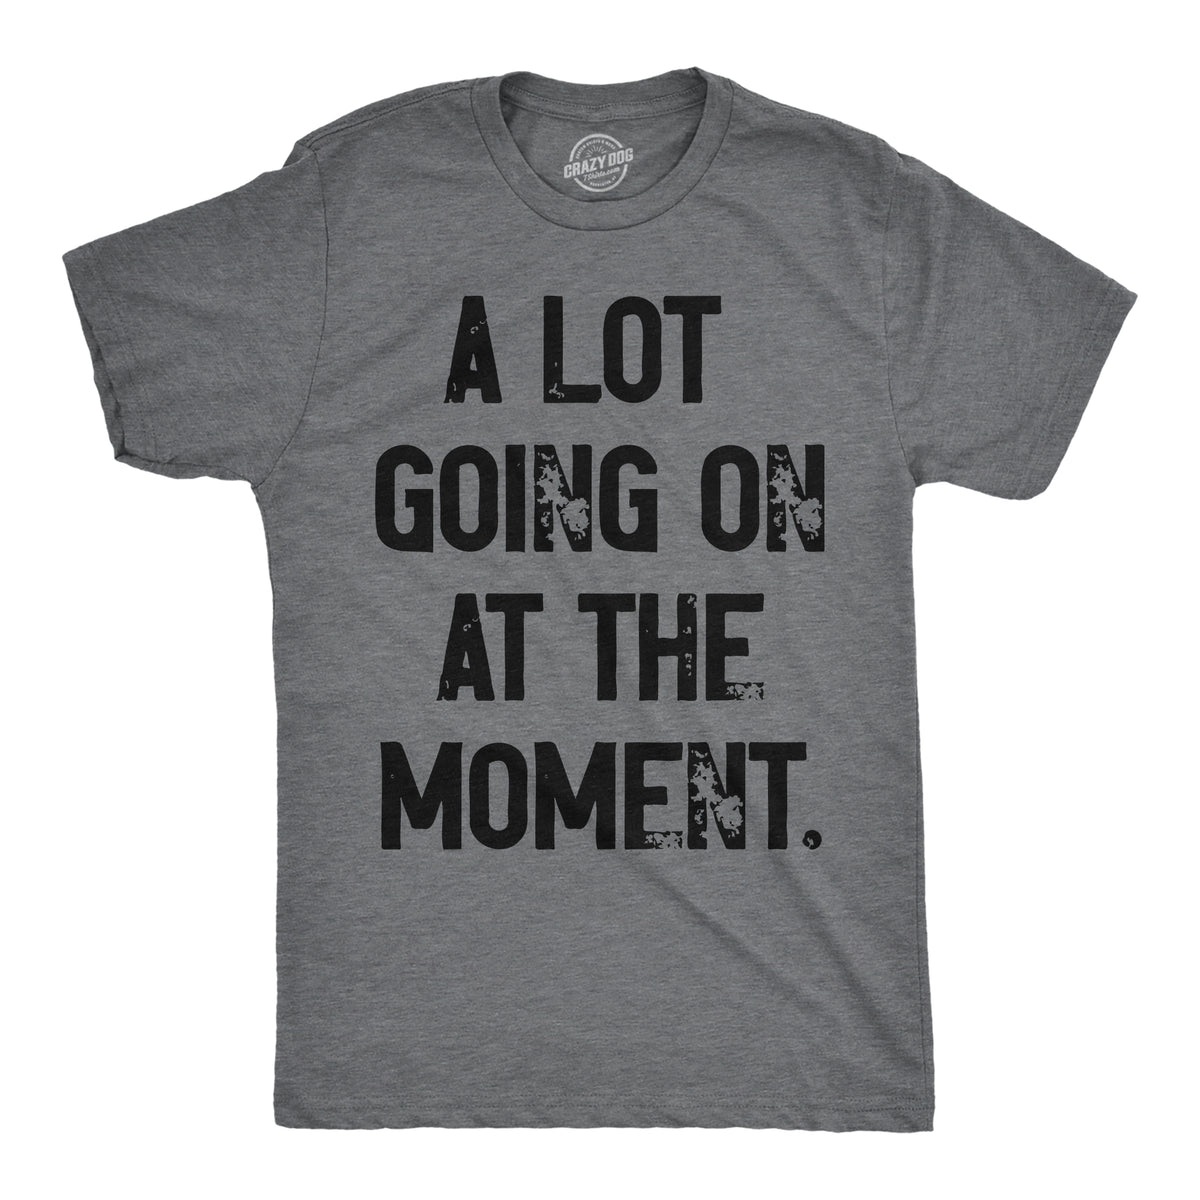 Funny Dark Heather Grey - A Lot Going On A Lot Going On At The Moment Mens T Shirt Nerdy Sarcastic Tee